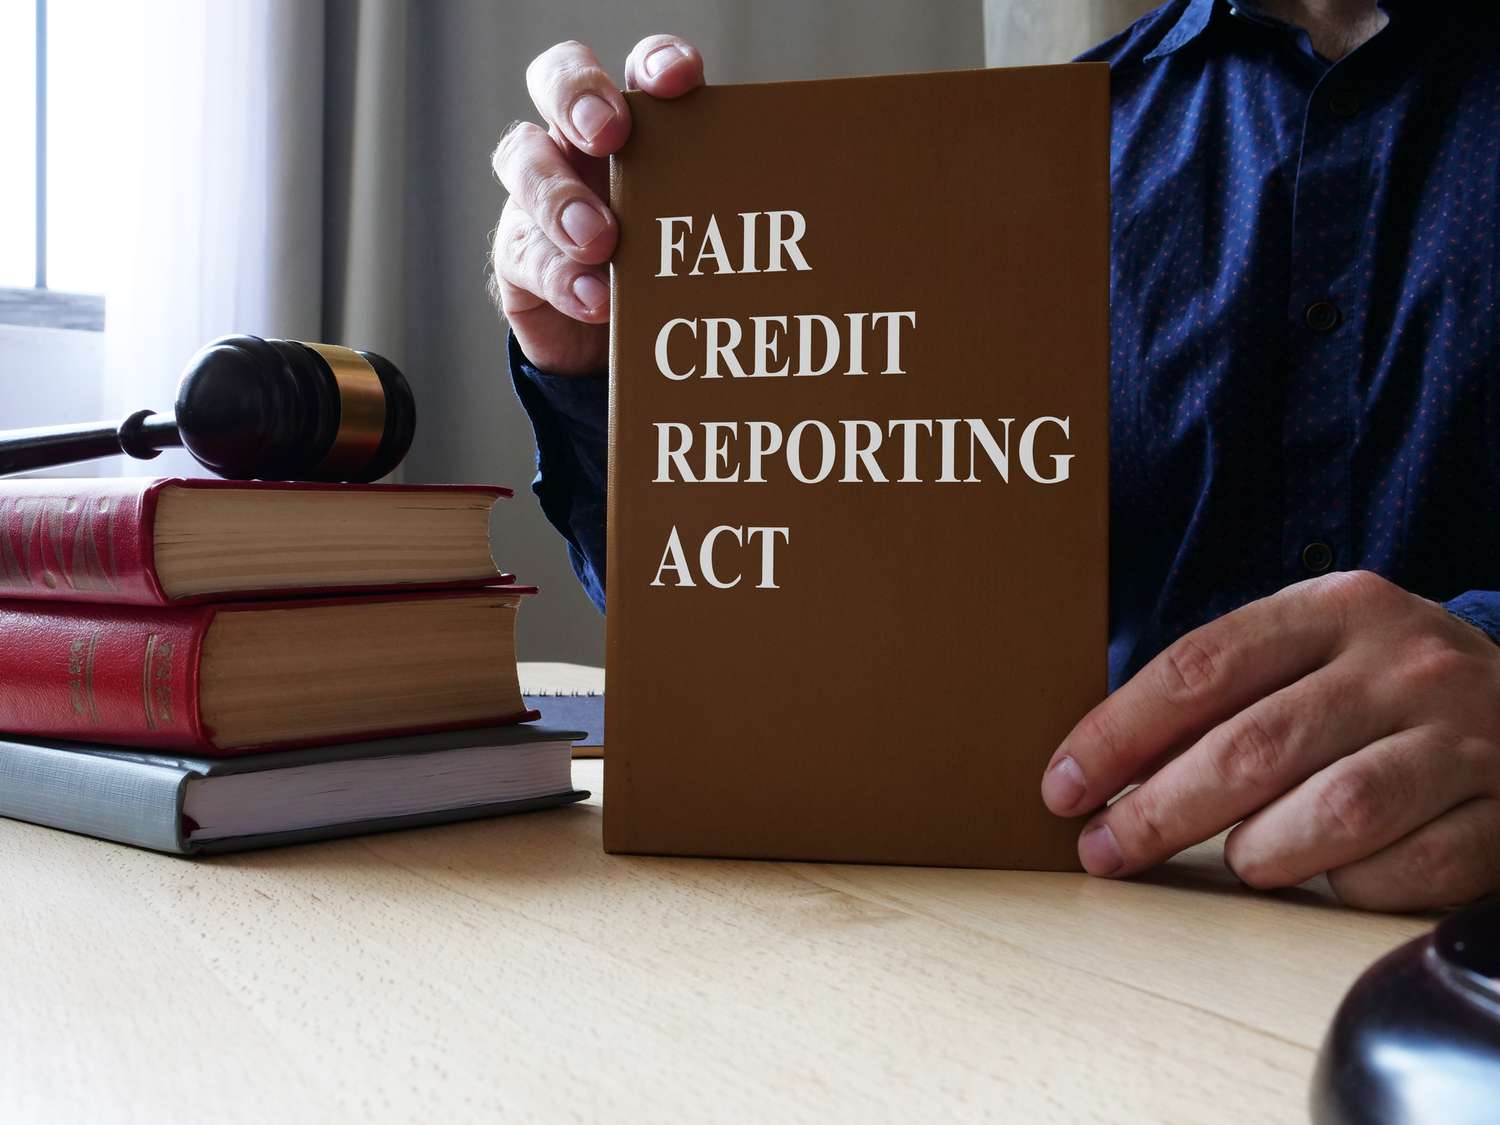 All About Fair Credit Reporting Act (FCRA)